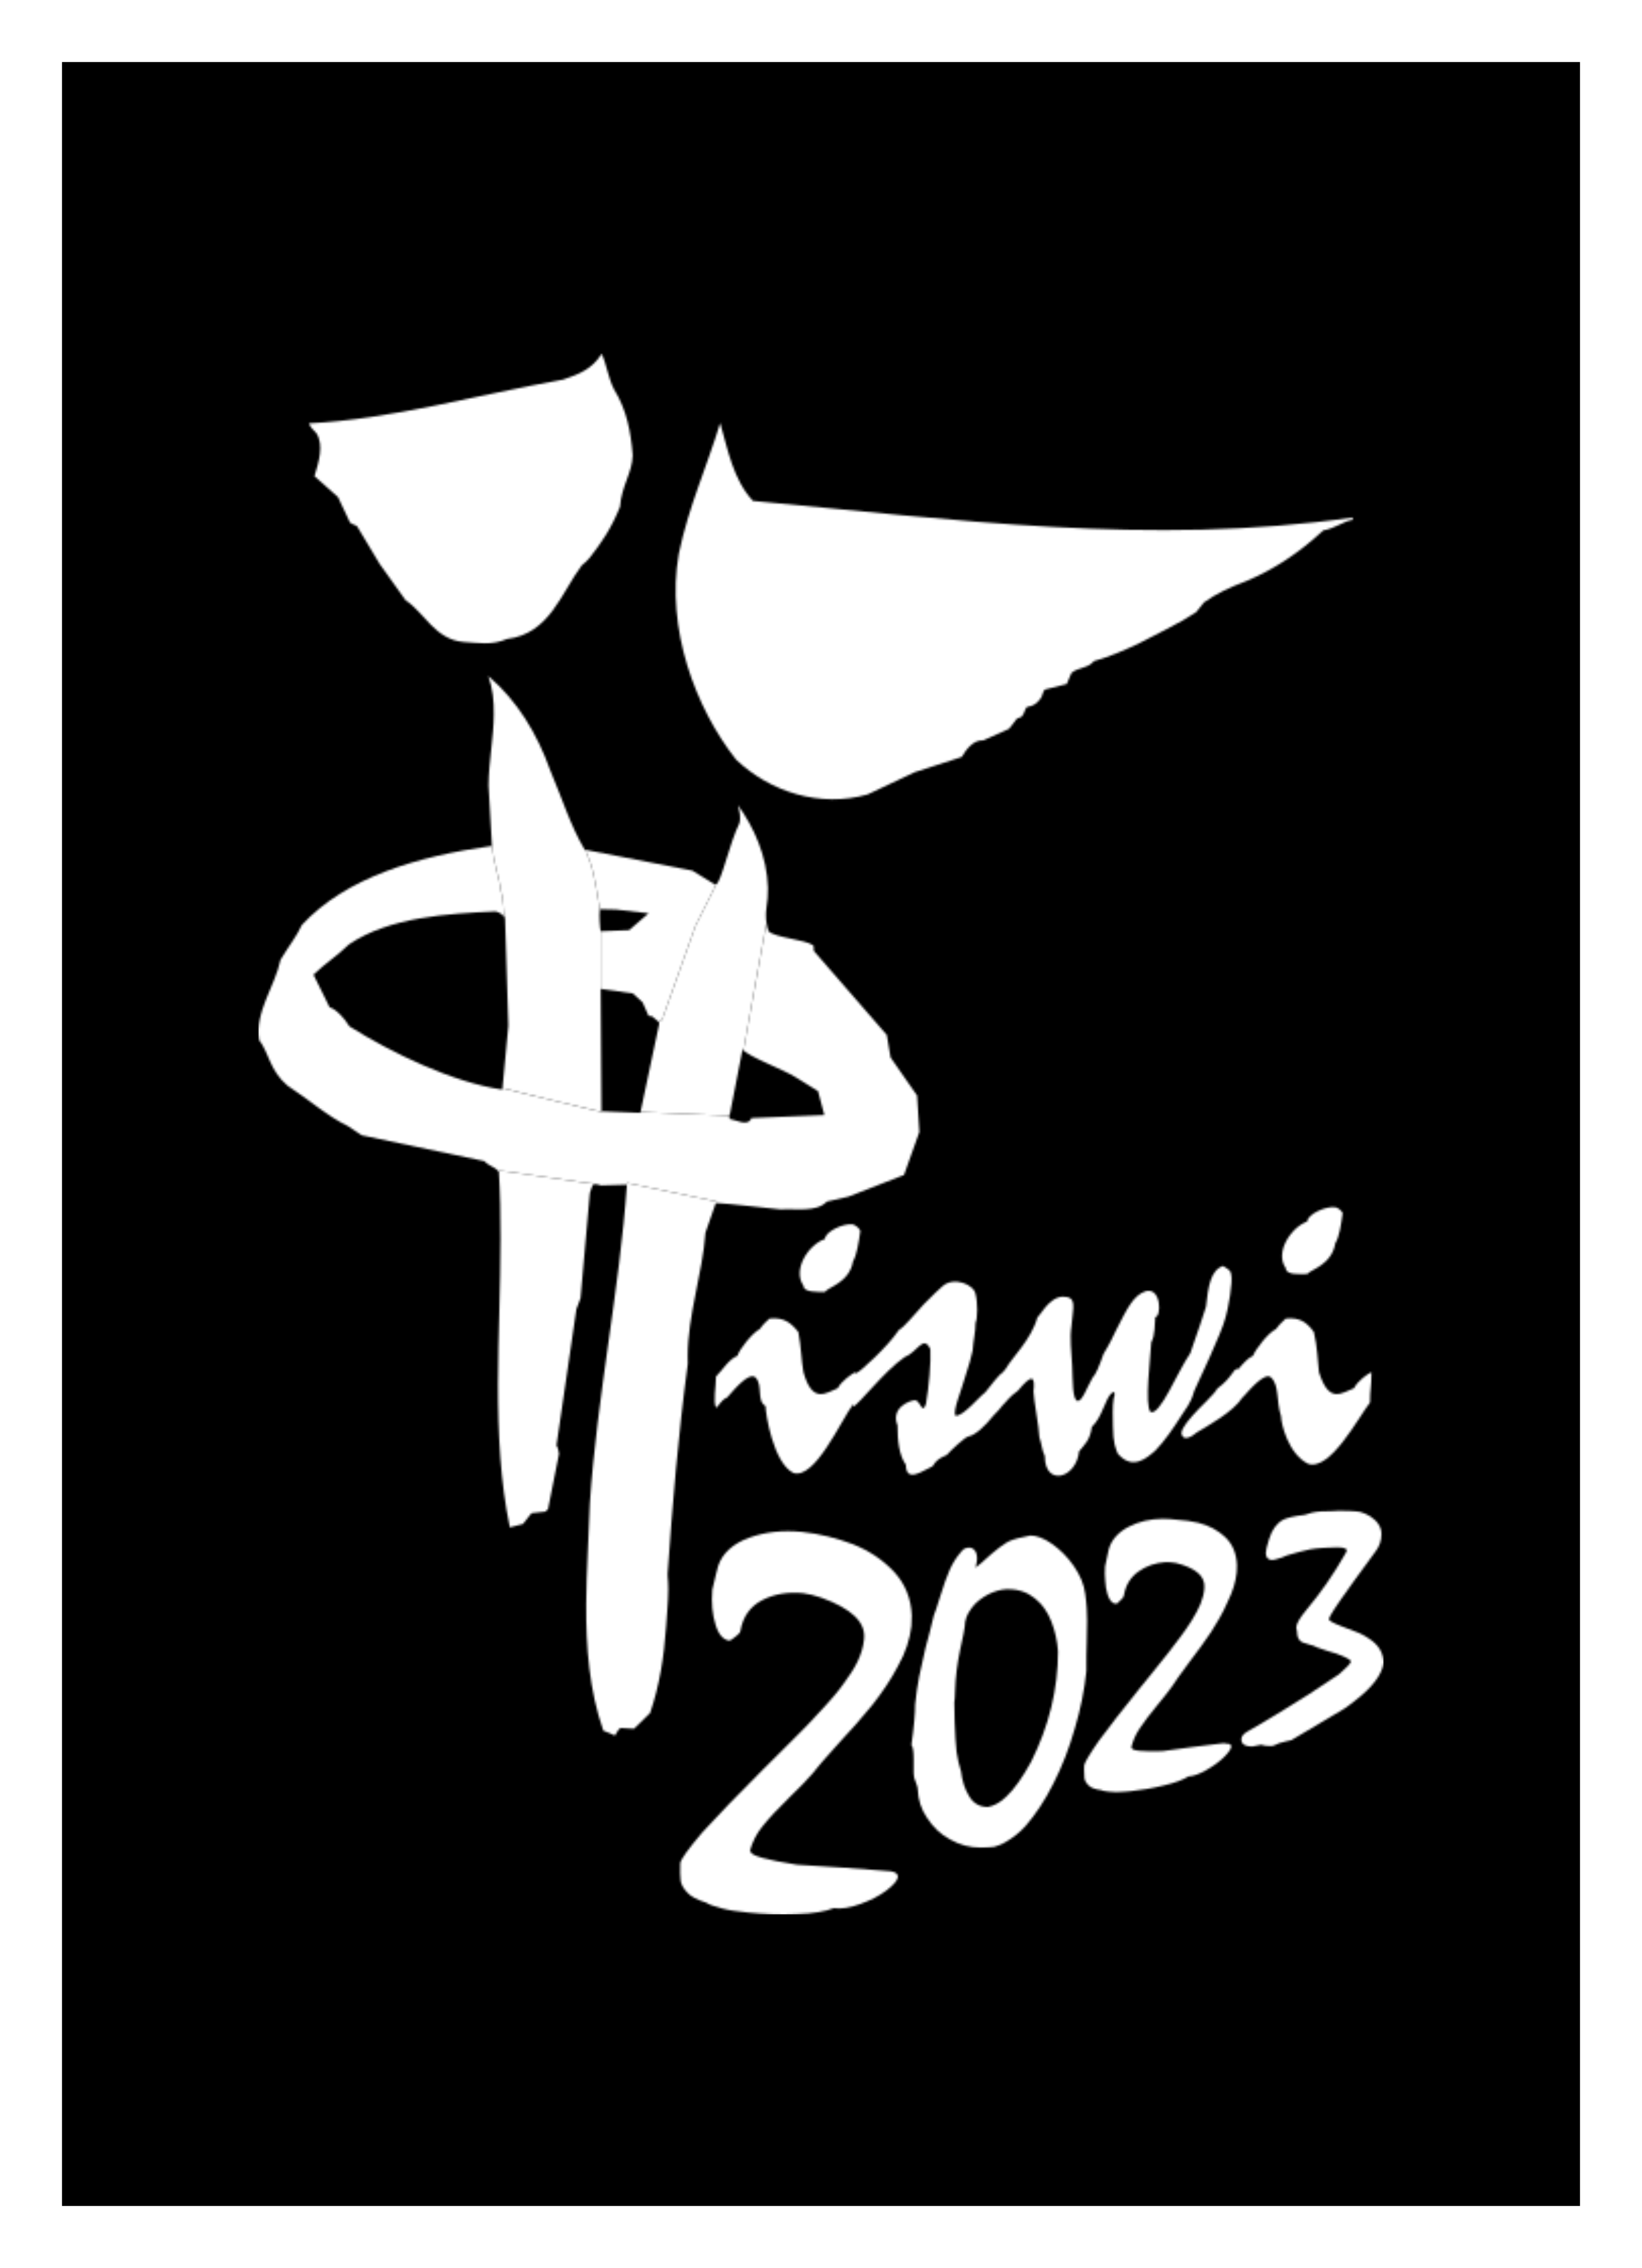 ISWI2023 1